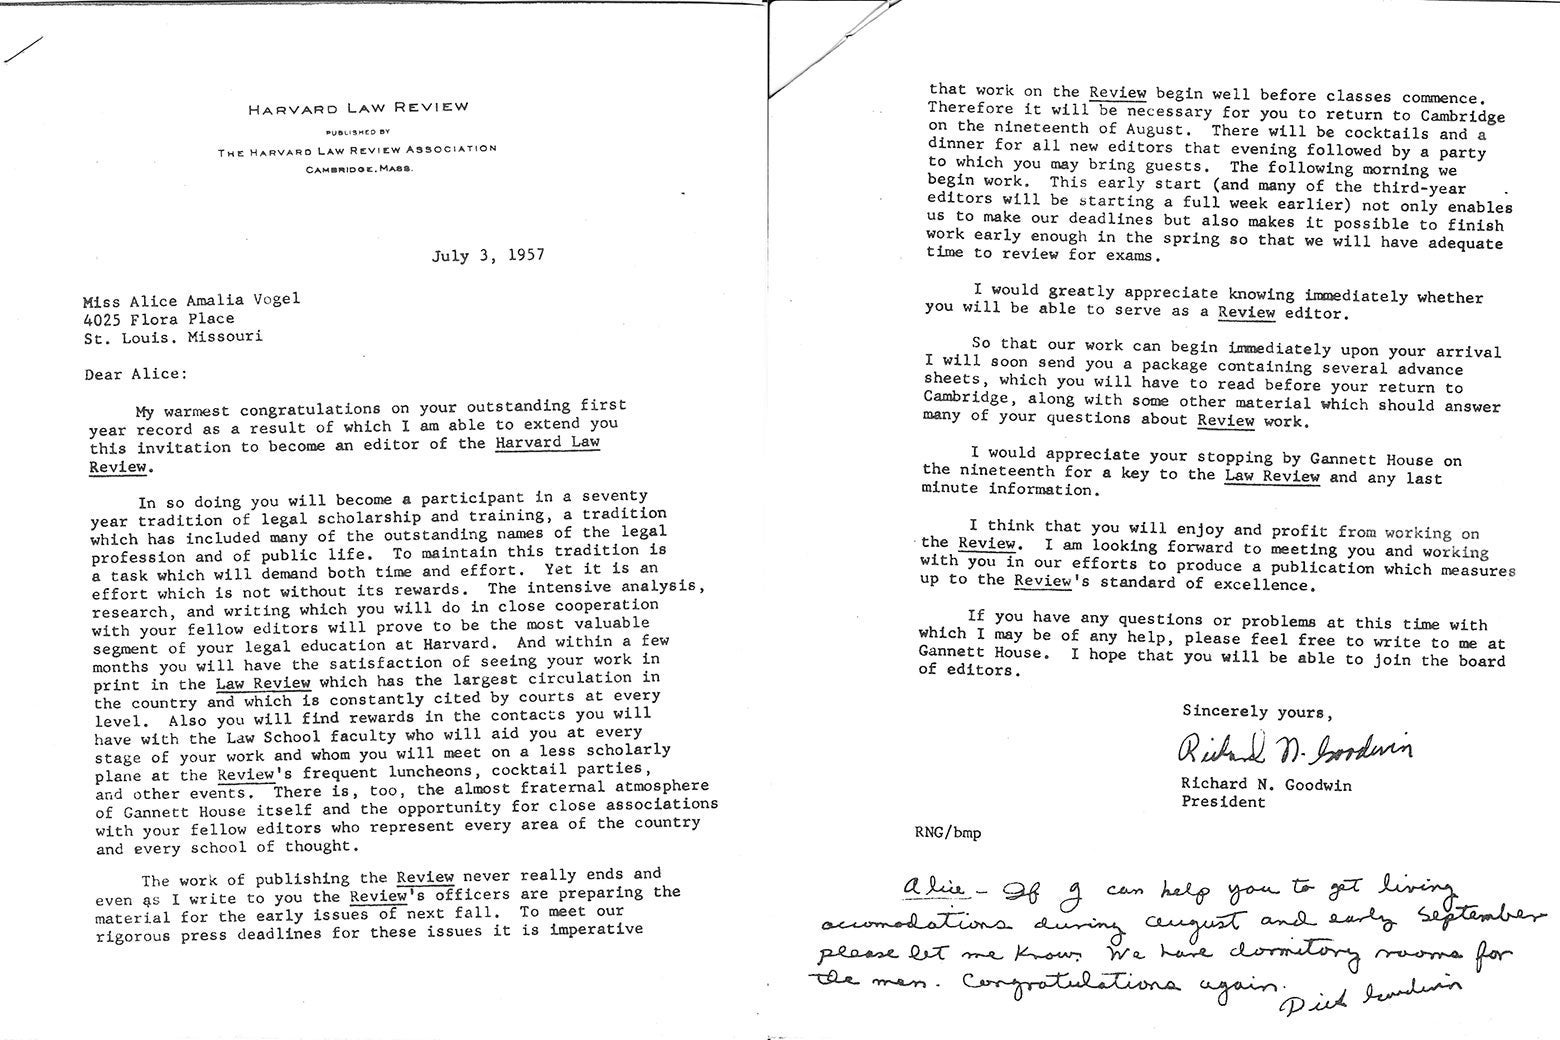 Harvard Law Review letter to Alice.